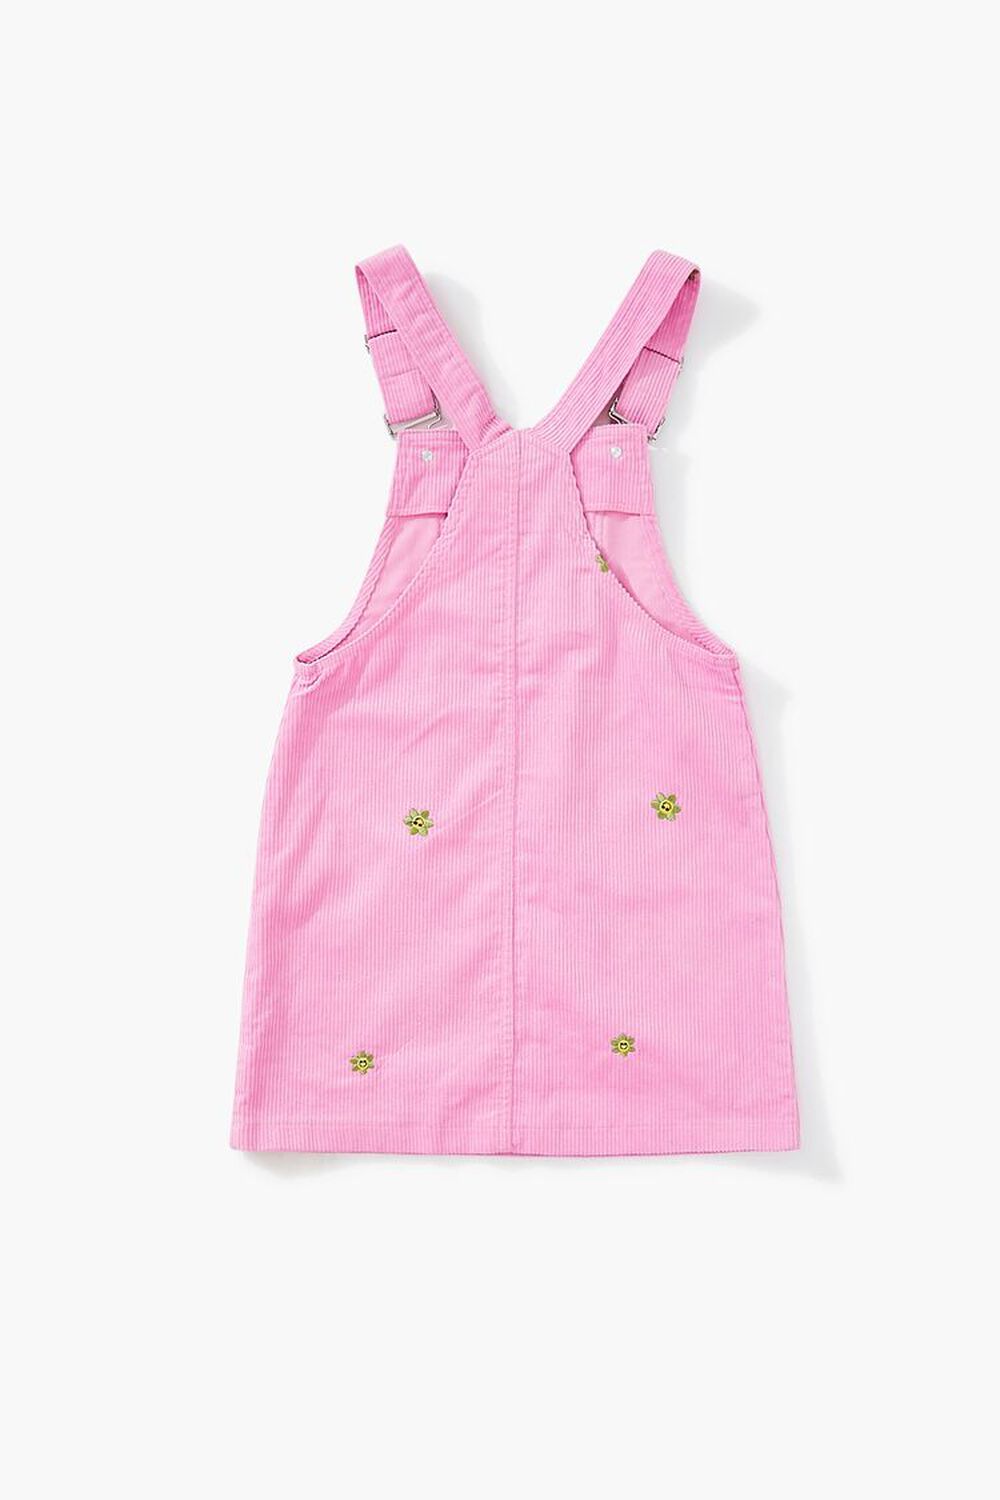 PINK/MULTI Girls Floral Overall Dress (Kids), image 2